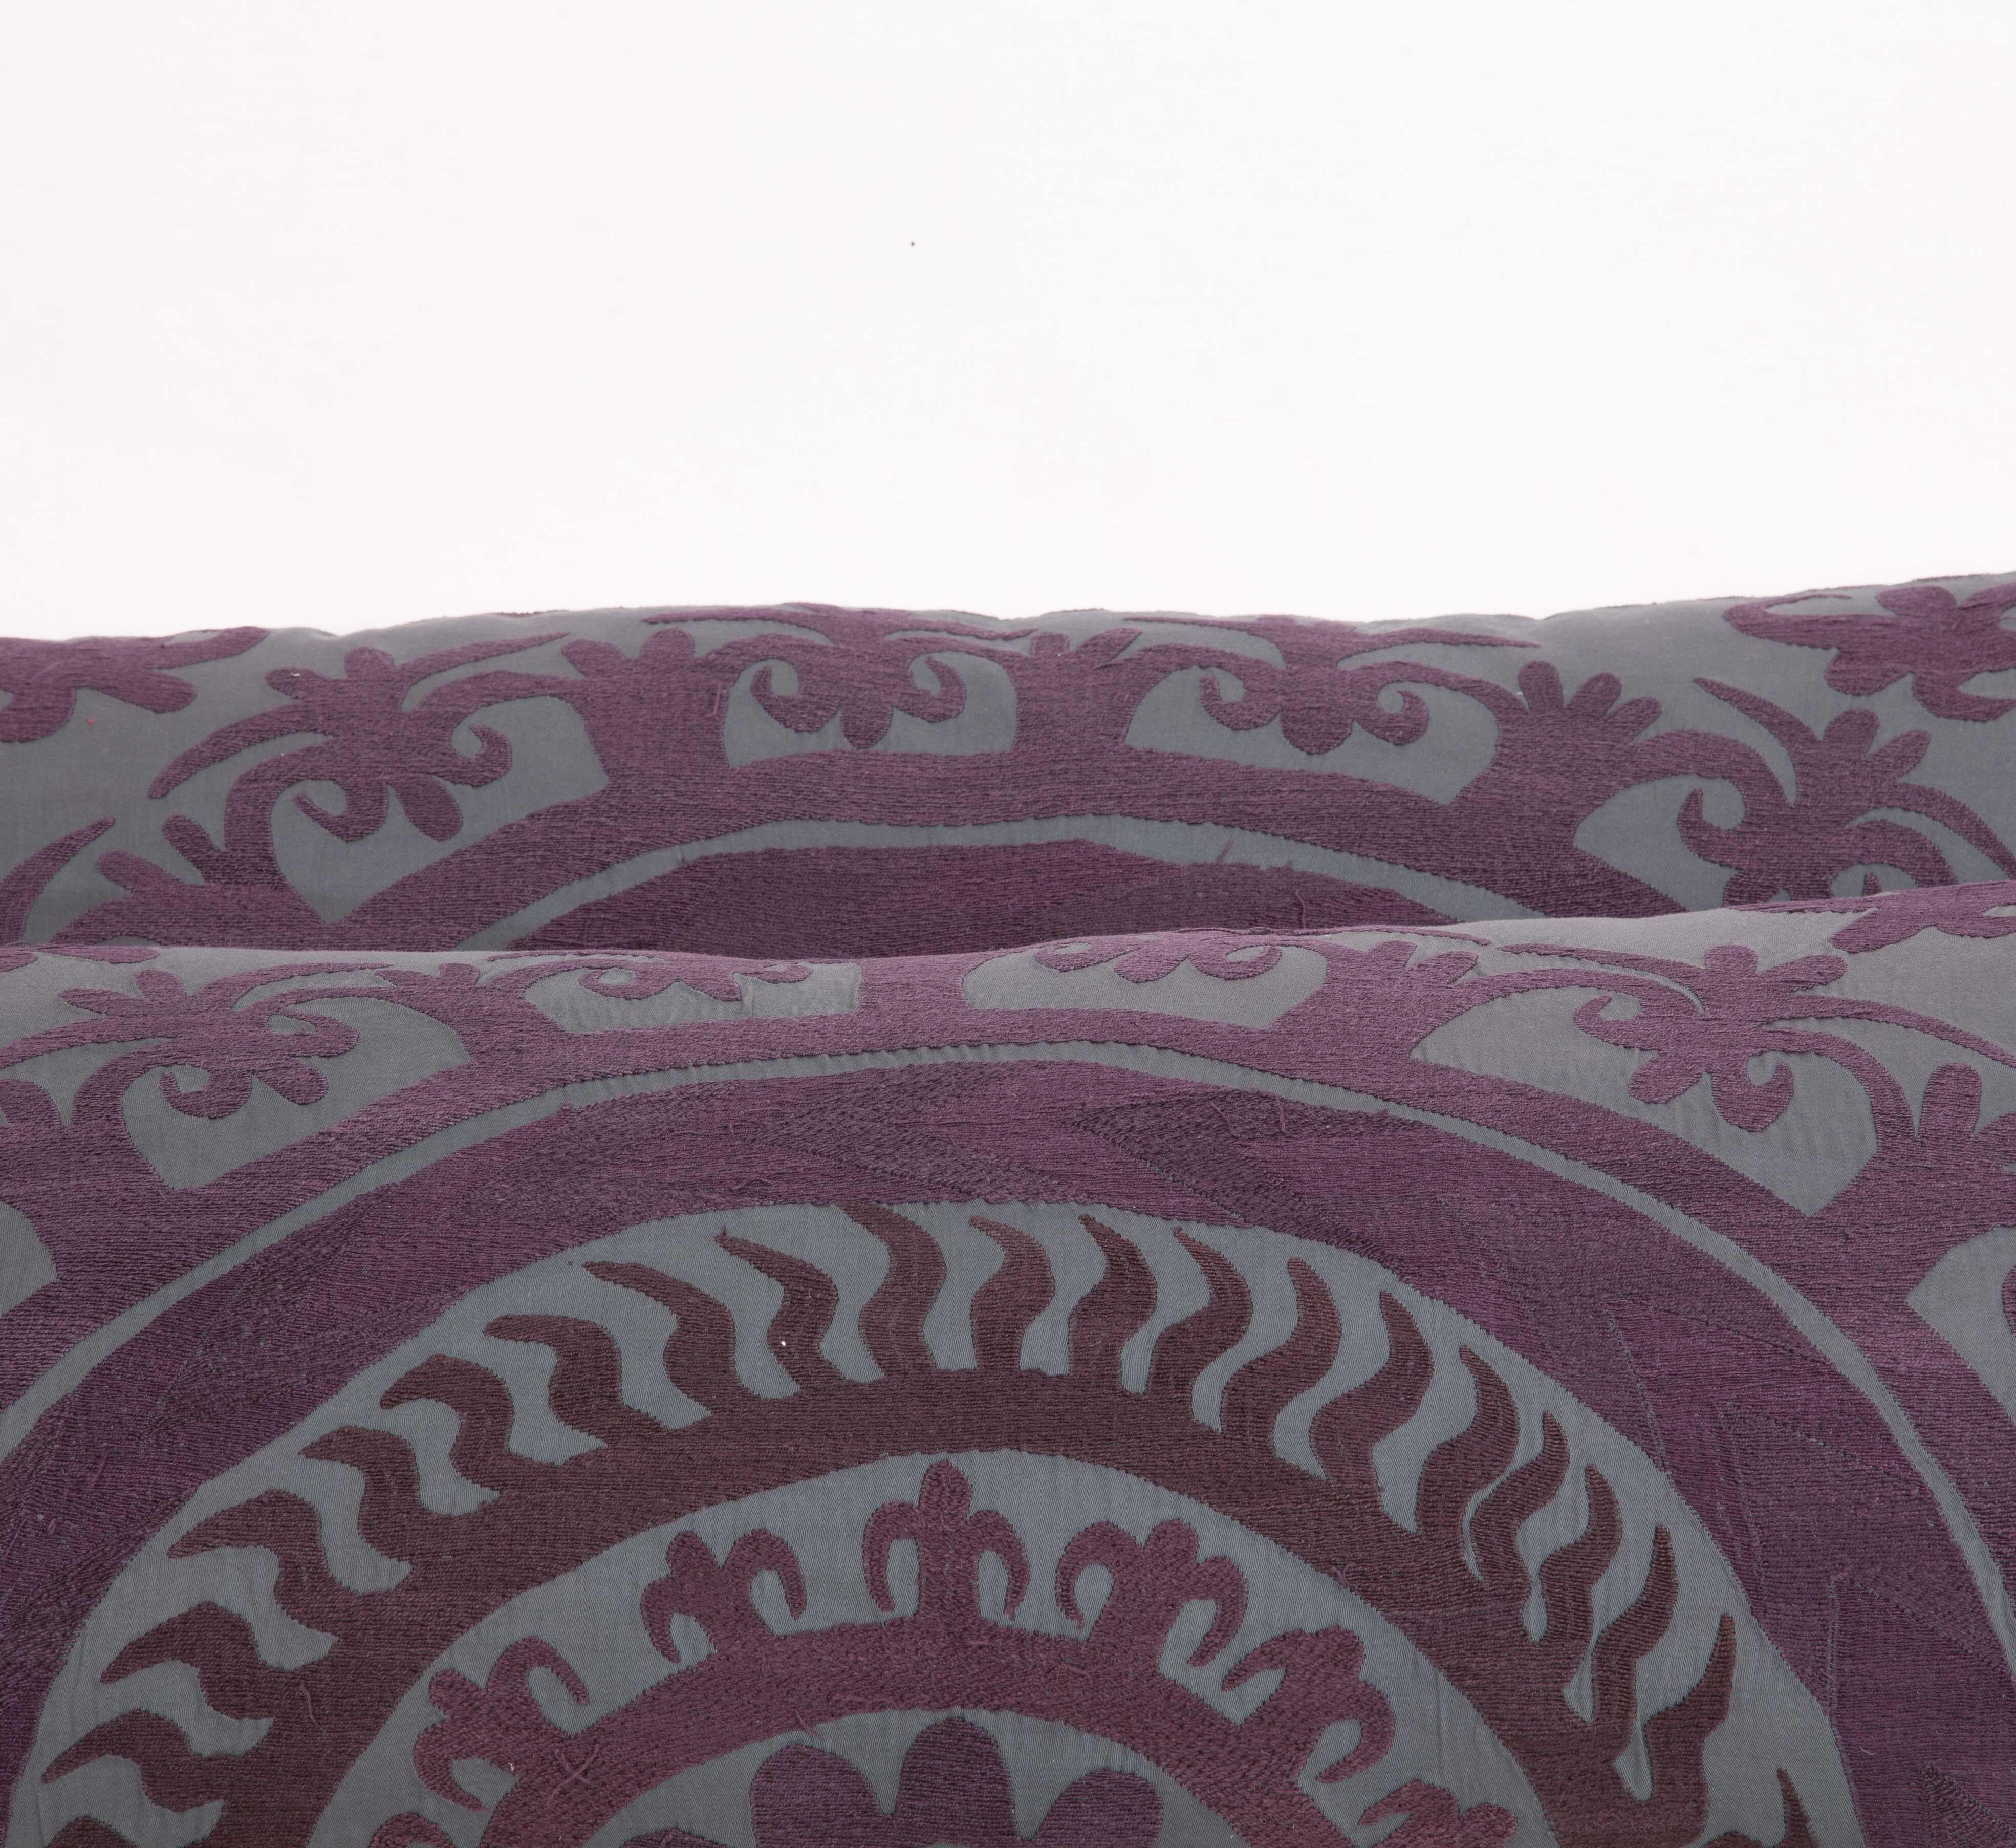 Cotton Suzani Lumbar Pillow Cases Fashioned from a Vintage Over Dyed Suzani For Sale